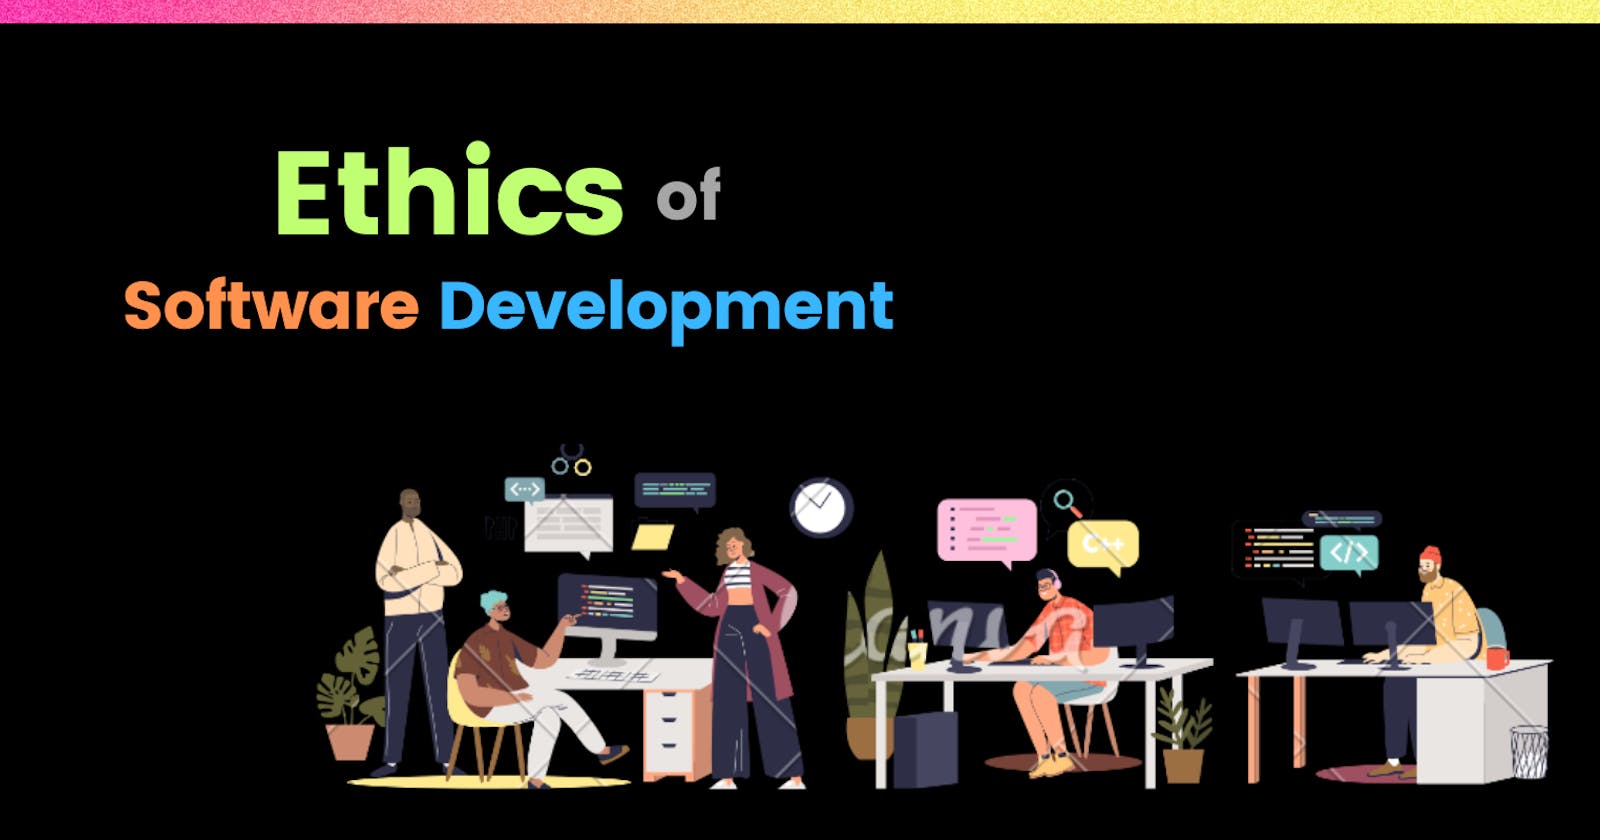 The Ethics of Software Development